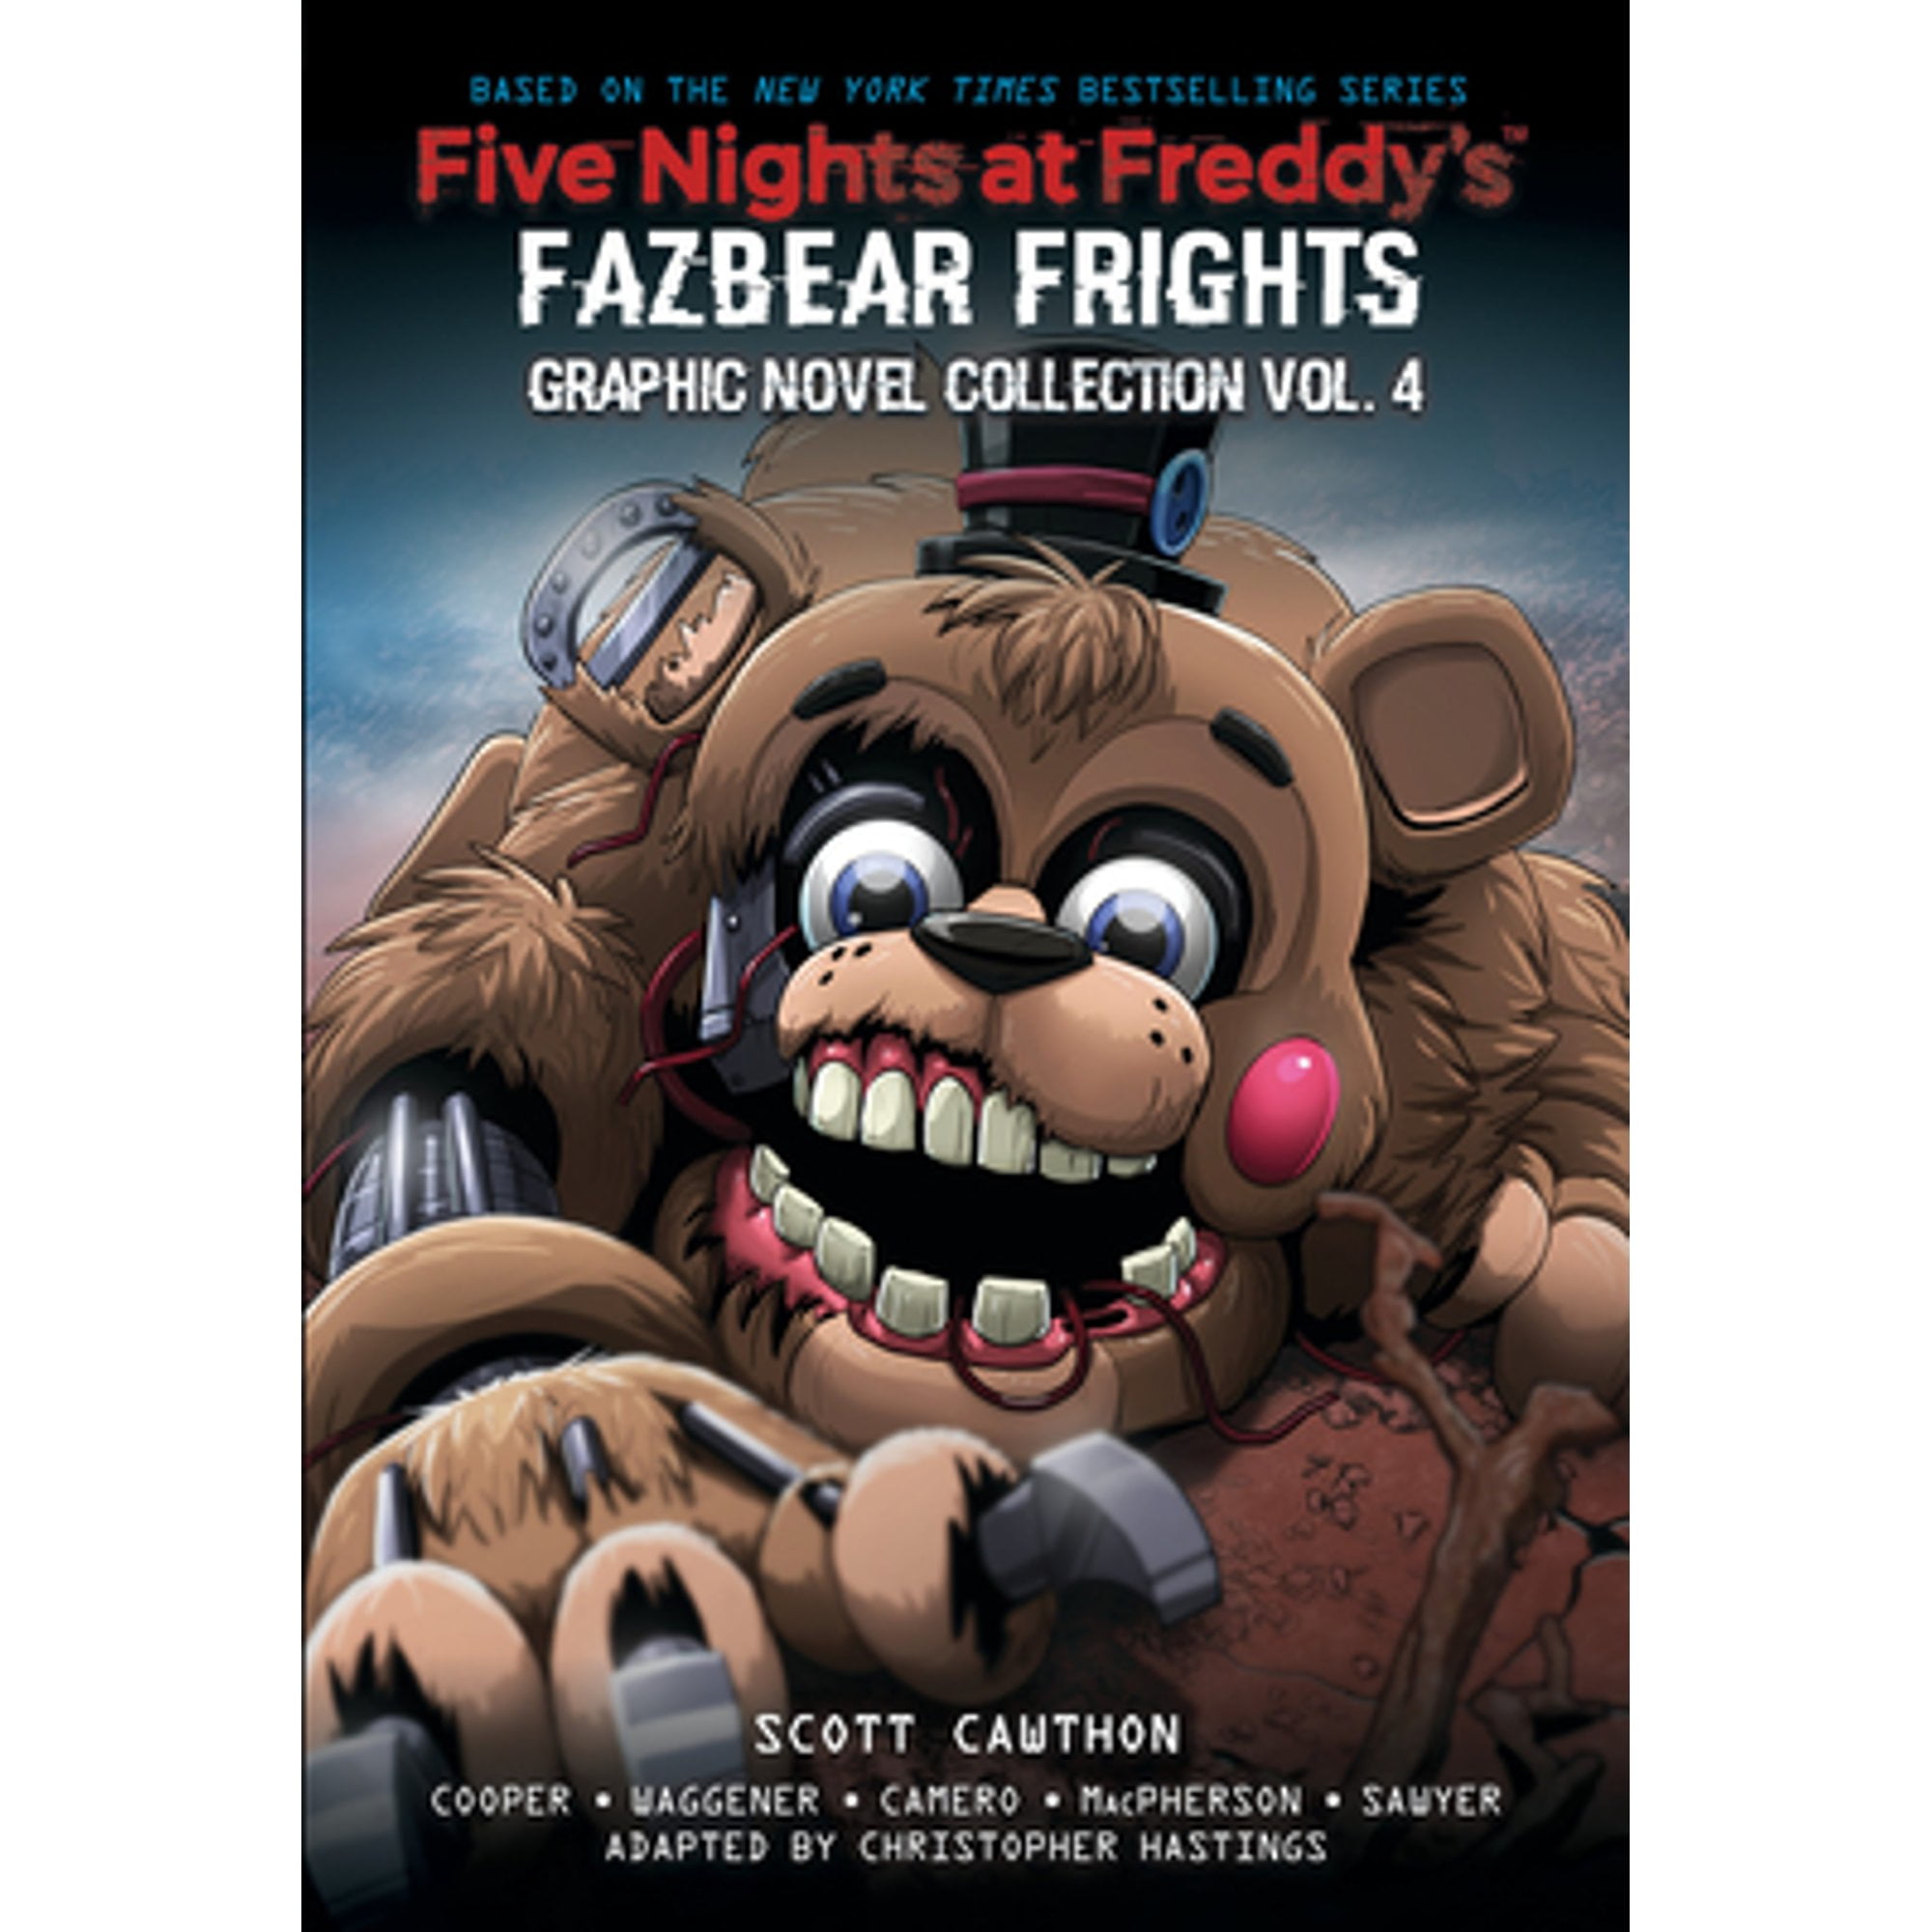 Pre-Owned Five Nights at Freddy's: Fazbear Frights Graphic Novel Collection Vol. 4 (Five Nights at (Paperback) by Scott Cawthon, Elley Cooper, Andrea Waggener